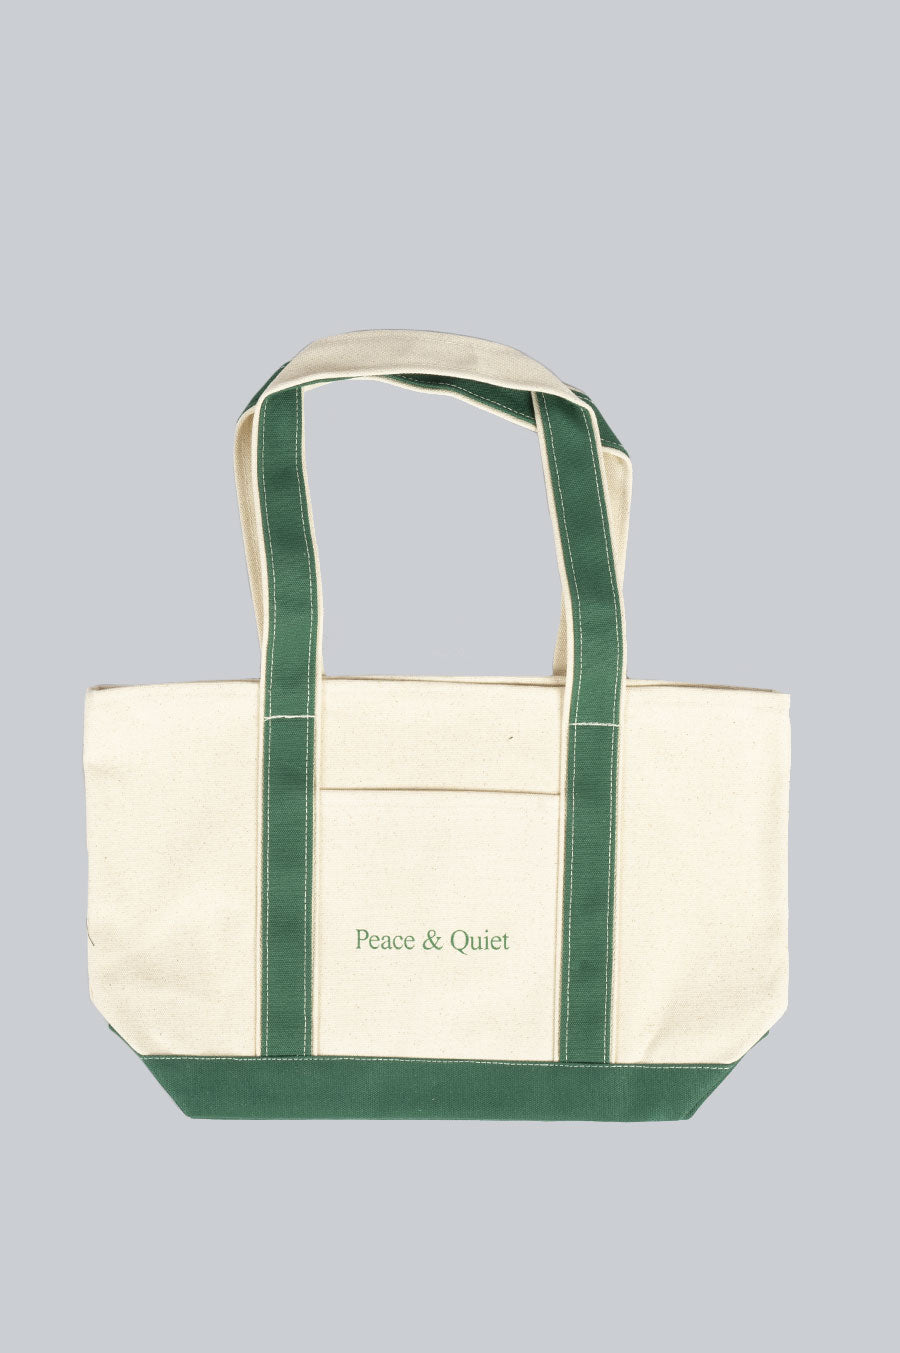 MUSEUM OF PEACE AND QUIET WORDMARK BOAT TOTE BAG FOREST NATURAL